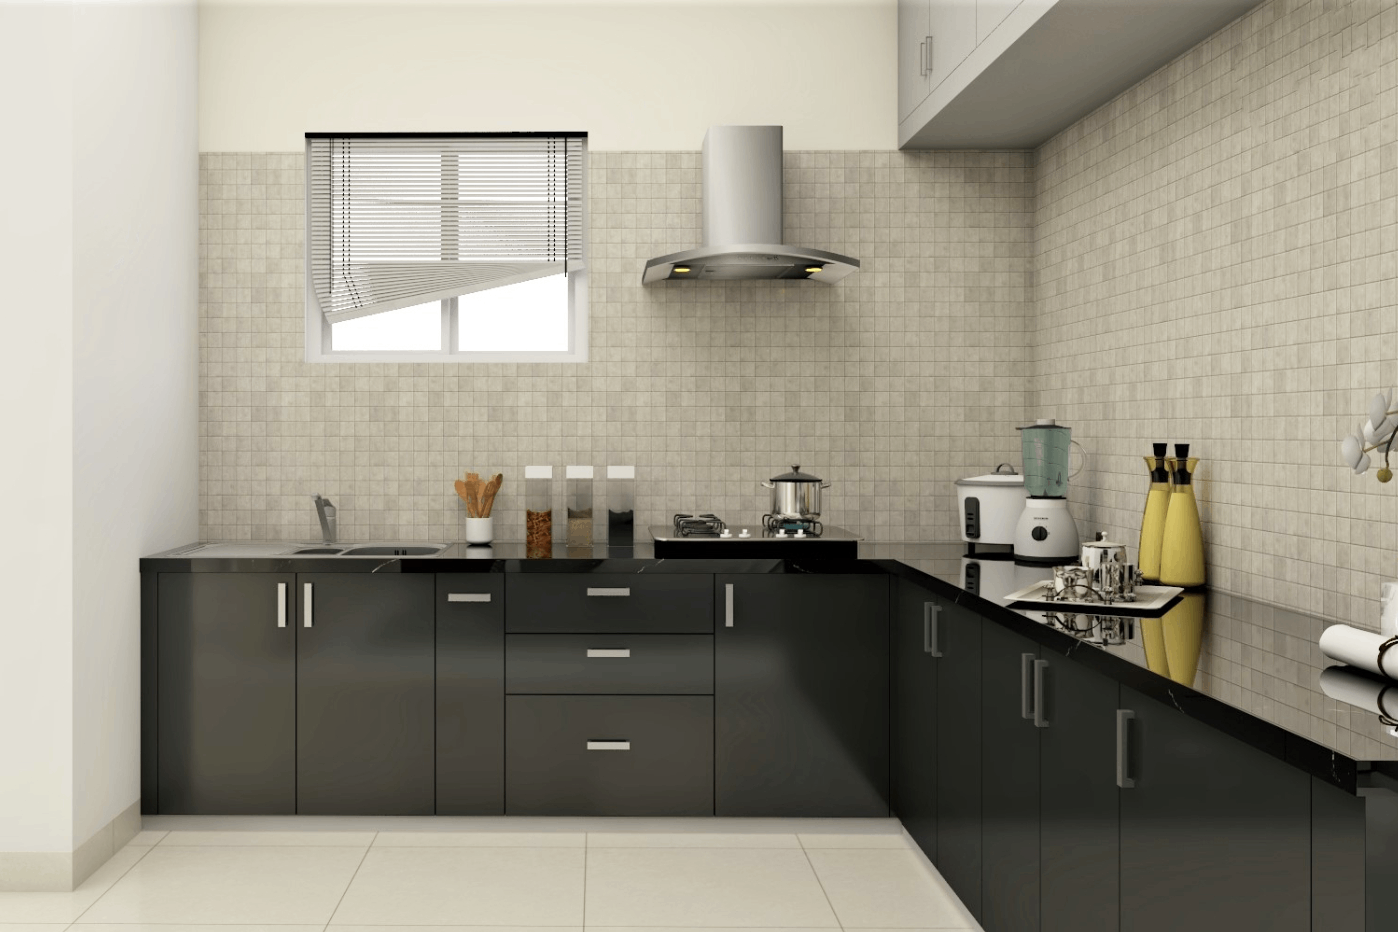 Spacious Modern L-Shaped Kitchen Design In Black And Grey